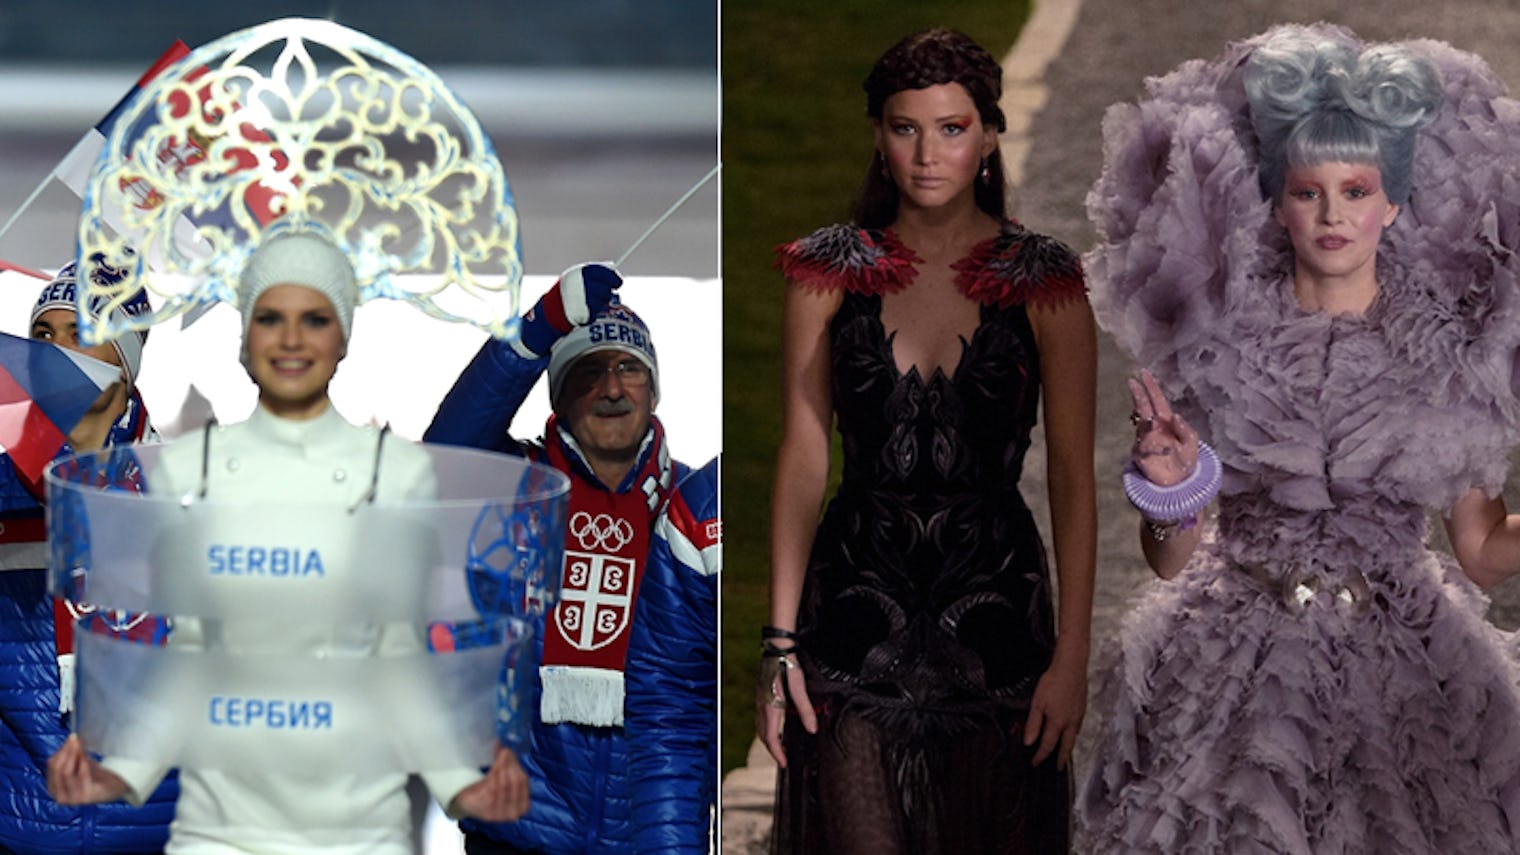 Sochi Olympics' Opening Ceremony & 'The Hunger Games' Have a Lot in Common